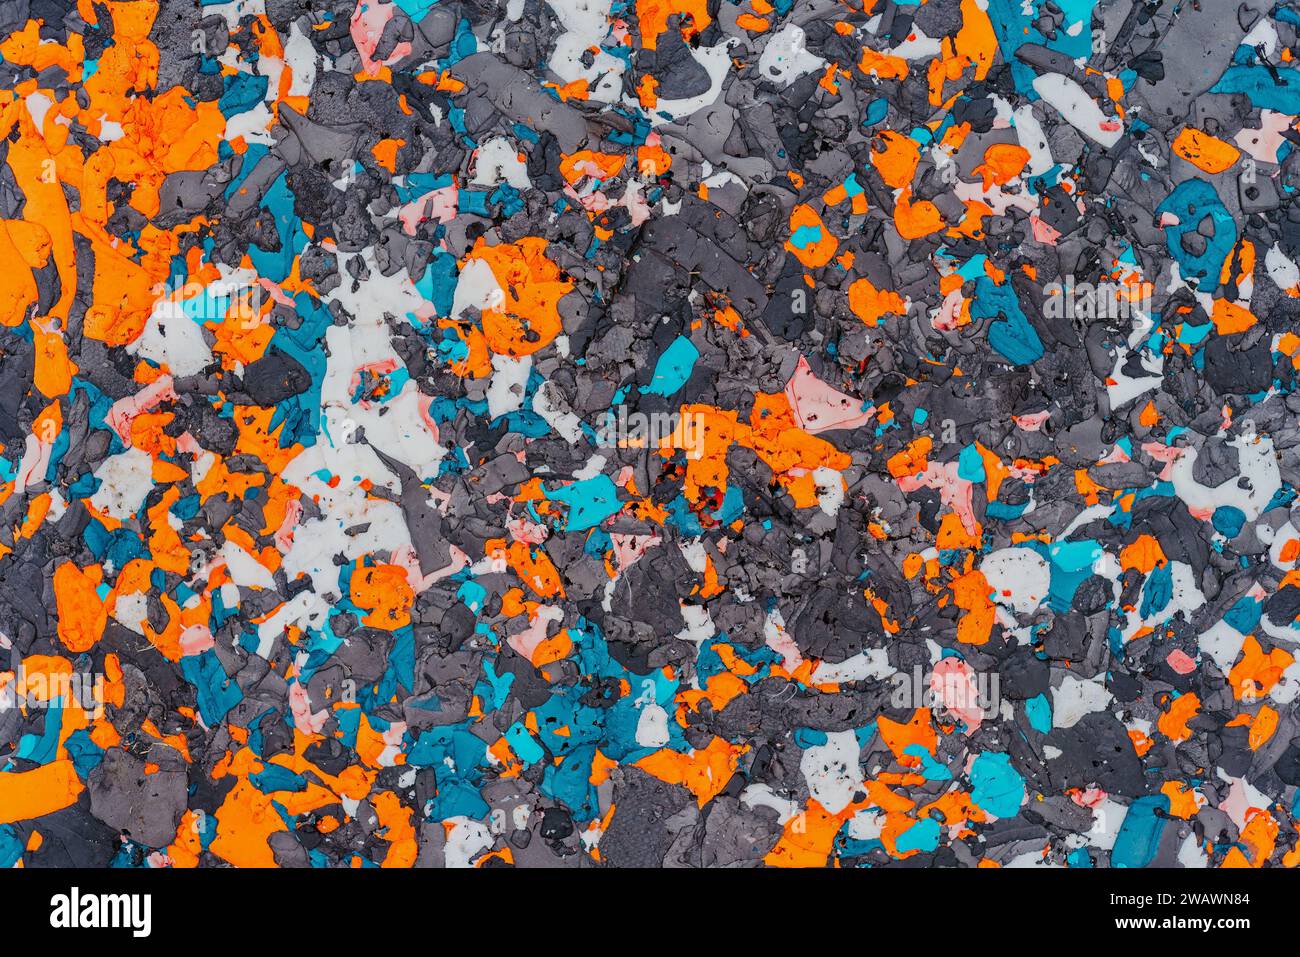 Colorful background made of Styrofoam or foam plastic orange, blue white and black colors together Stock Photo